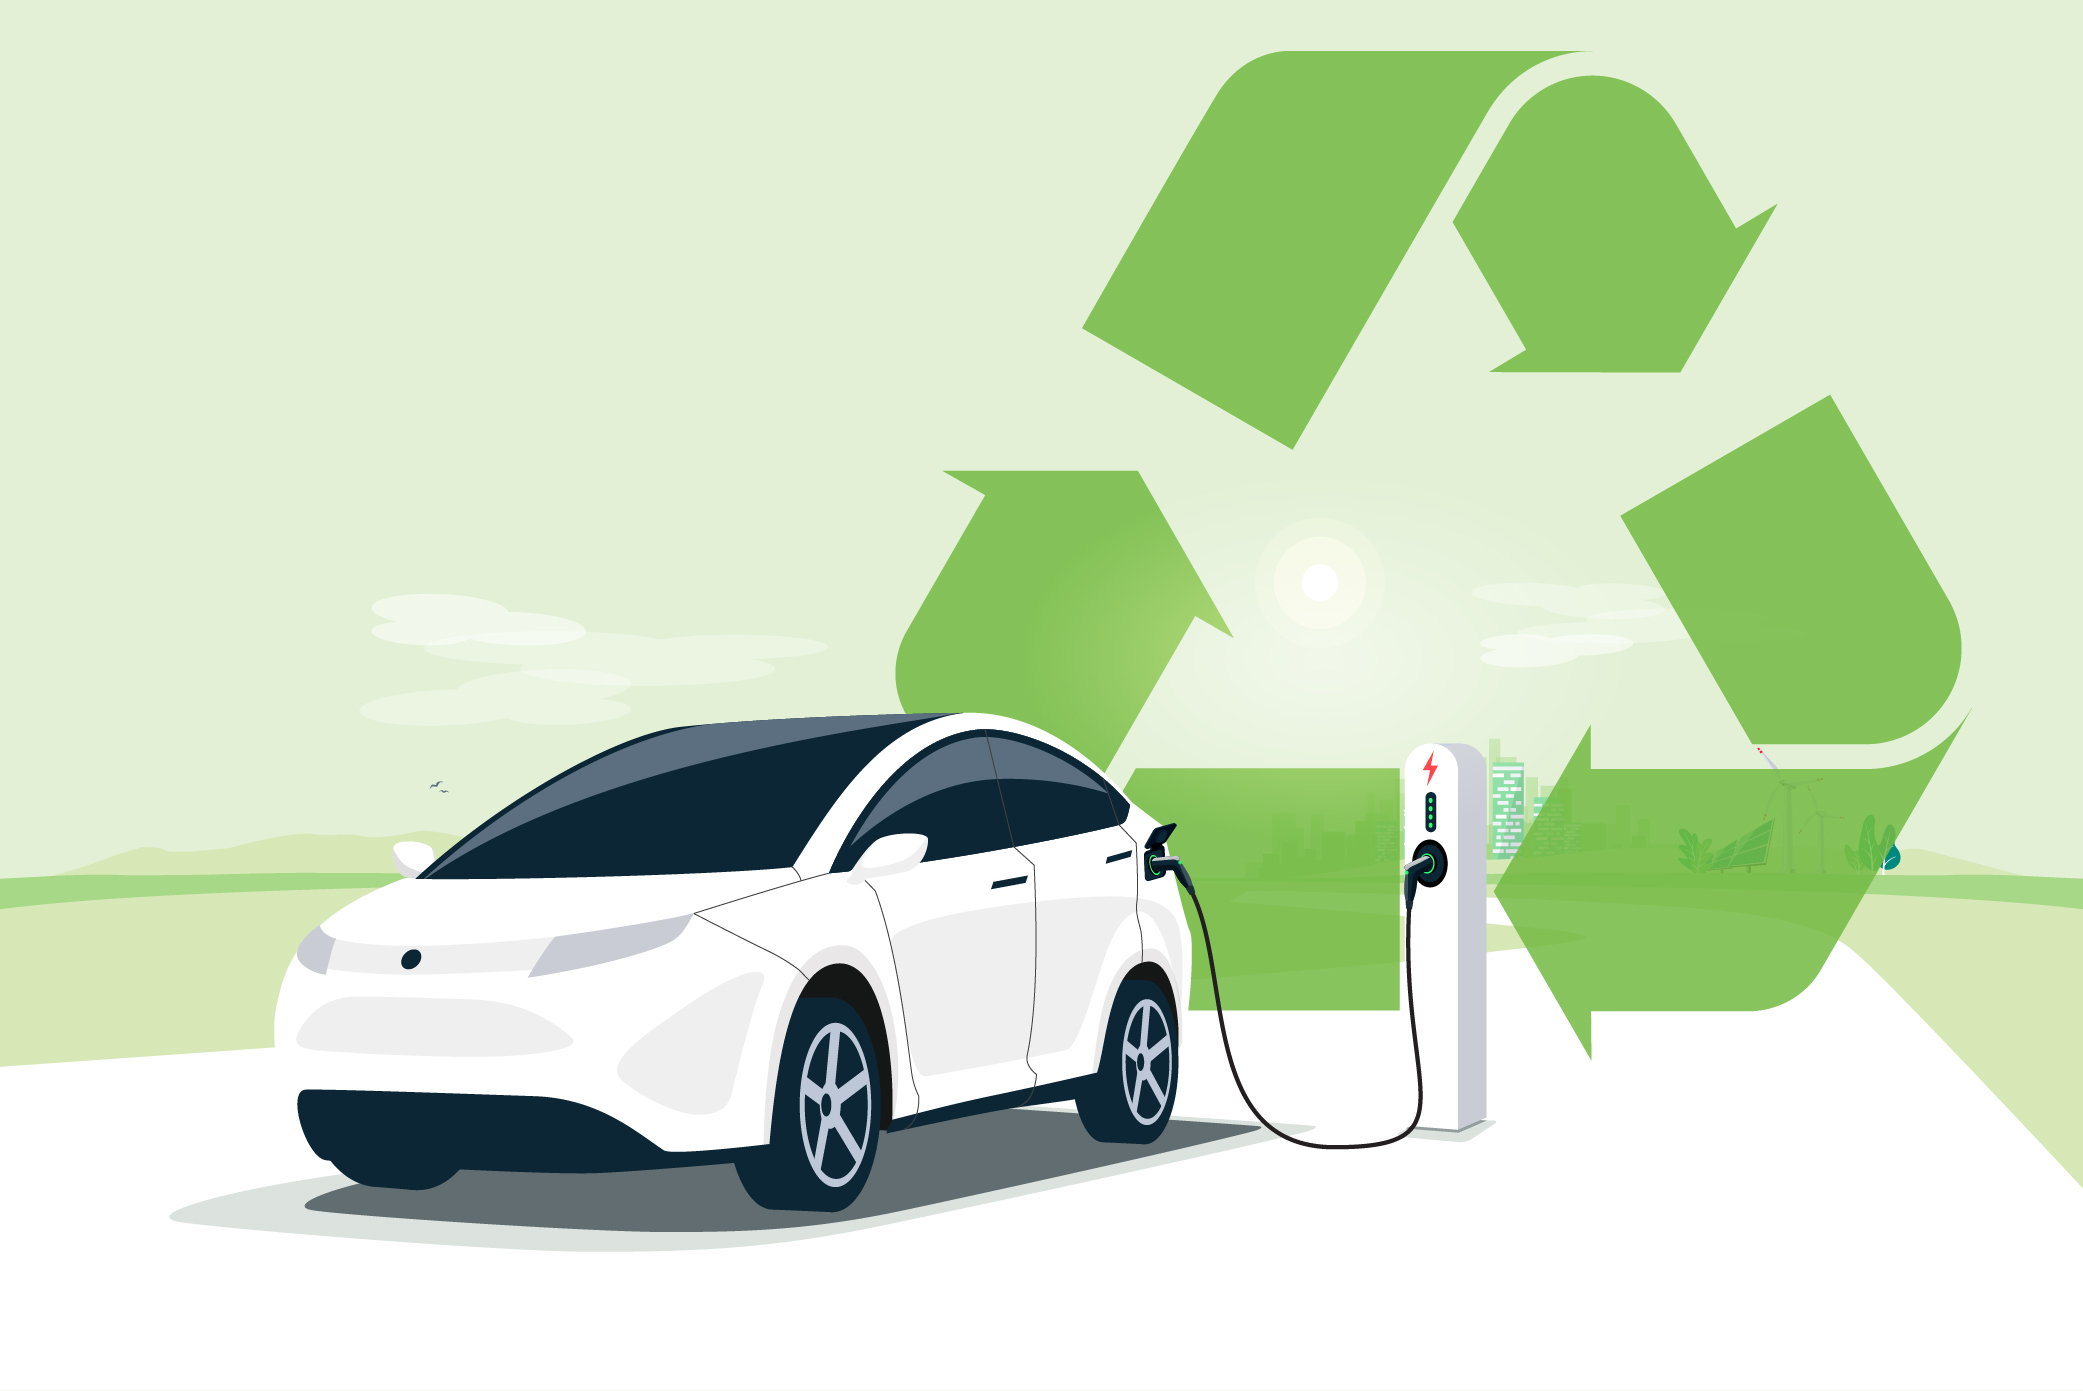 Illustration of a white electric vehicle charging with a green recycling symbol behind it